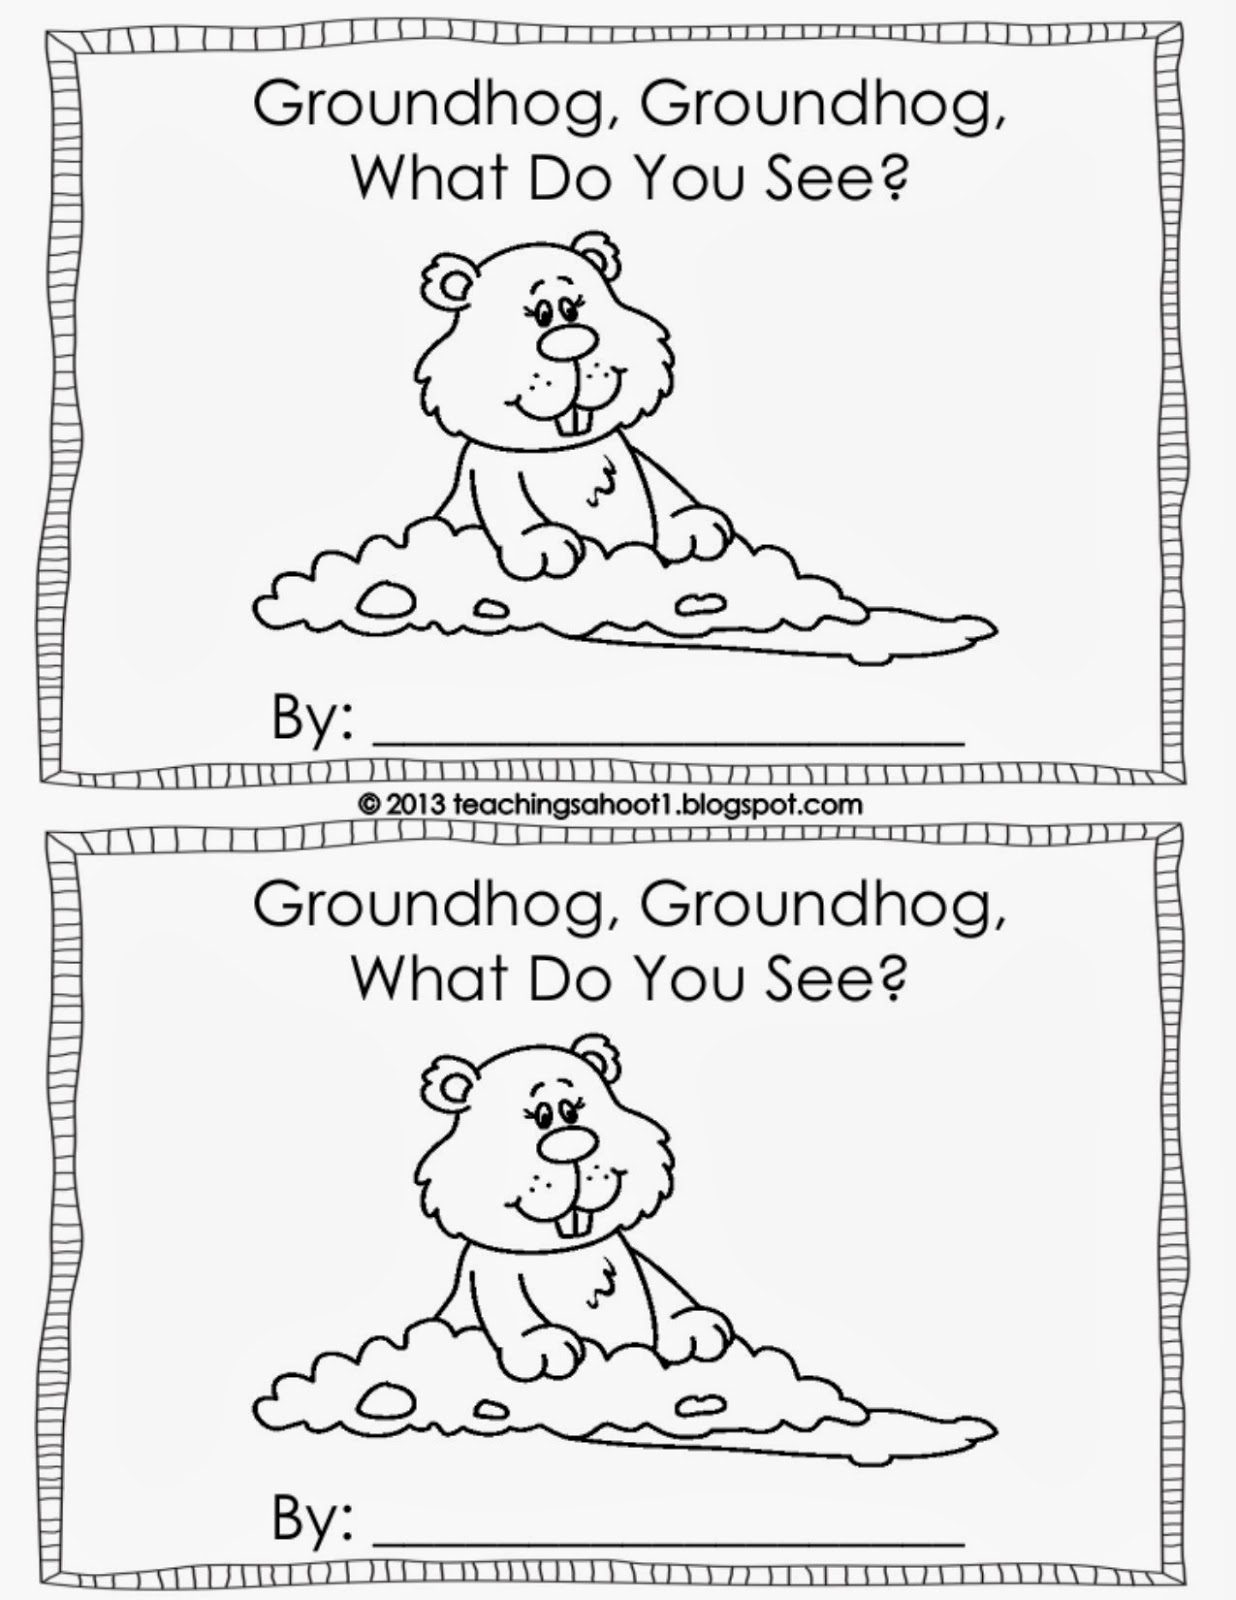 history-of-groundhog-day-worksheets-simple-living-creative-learning